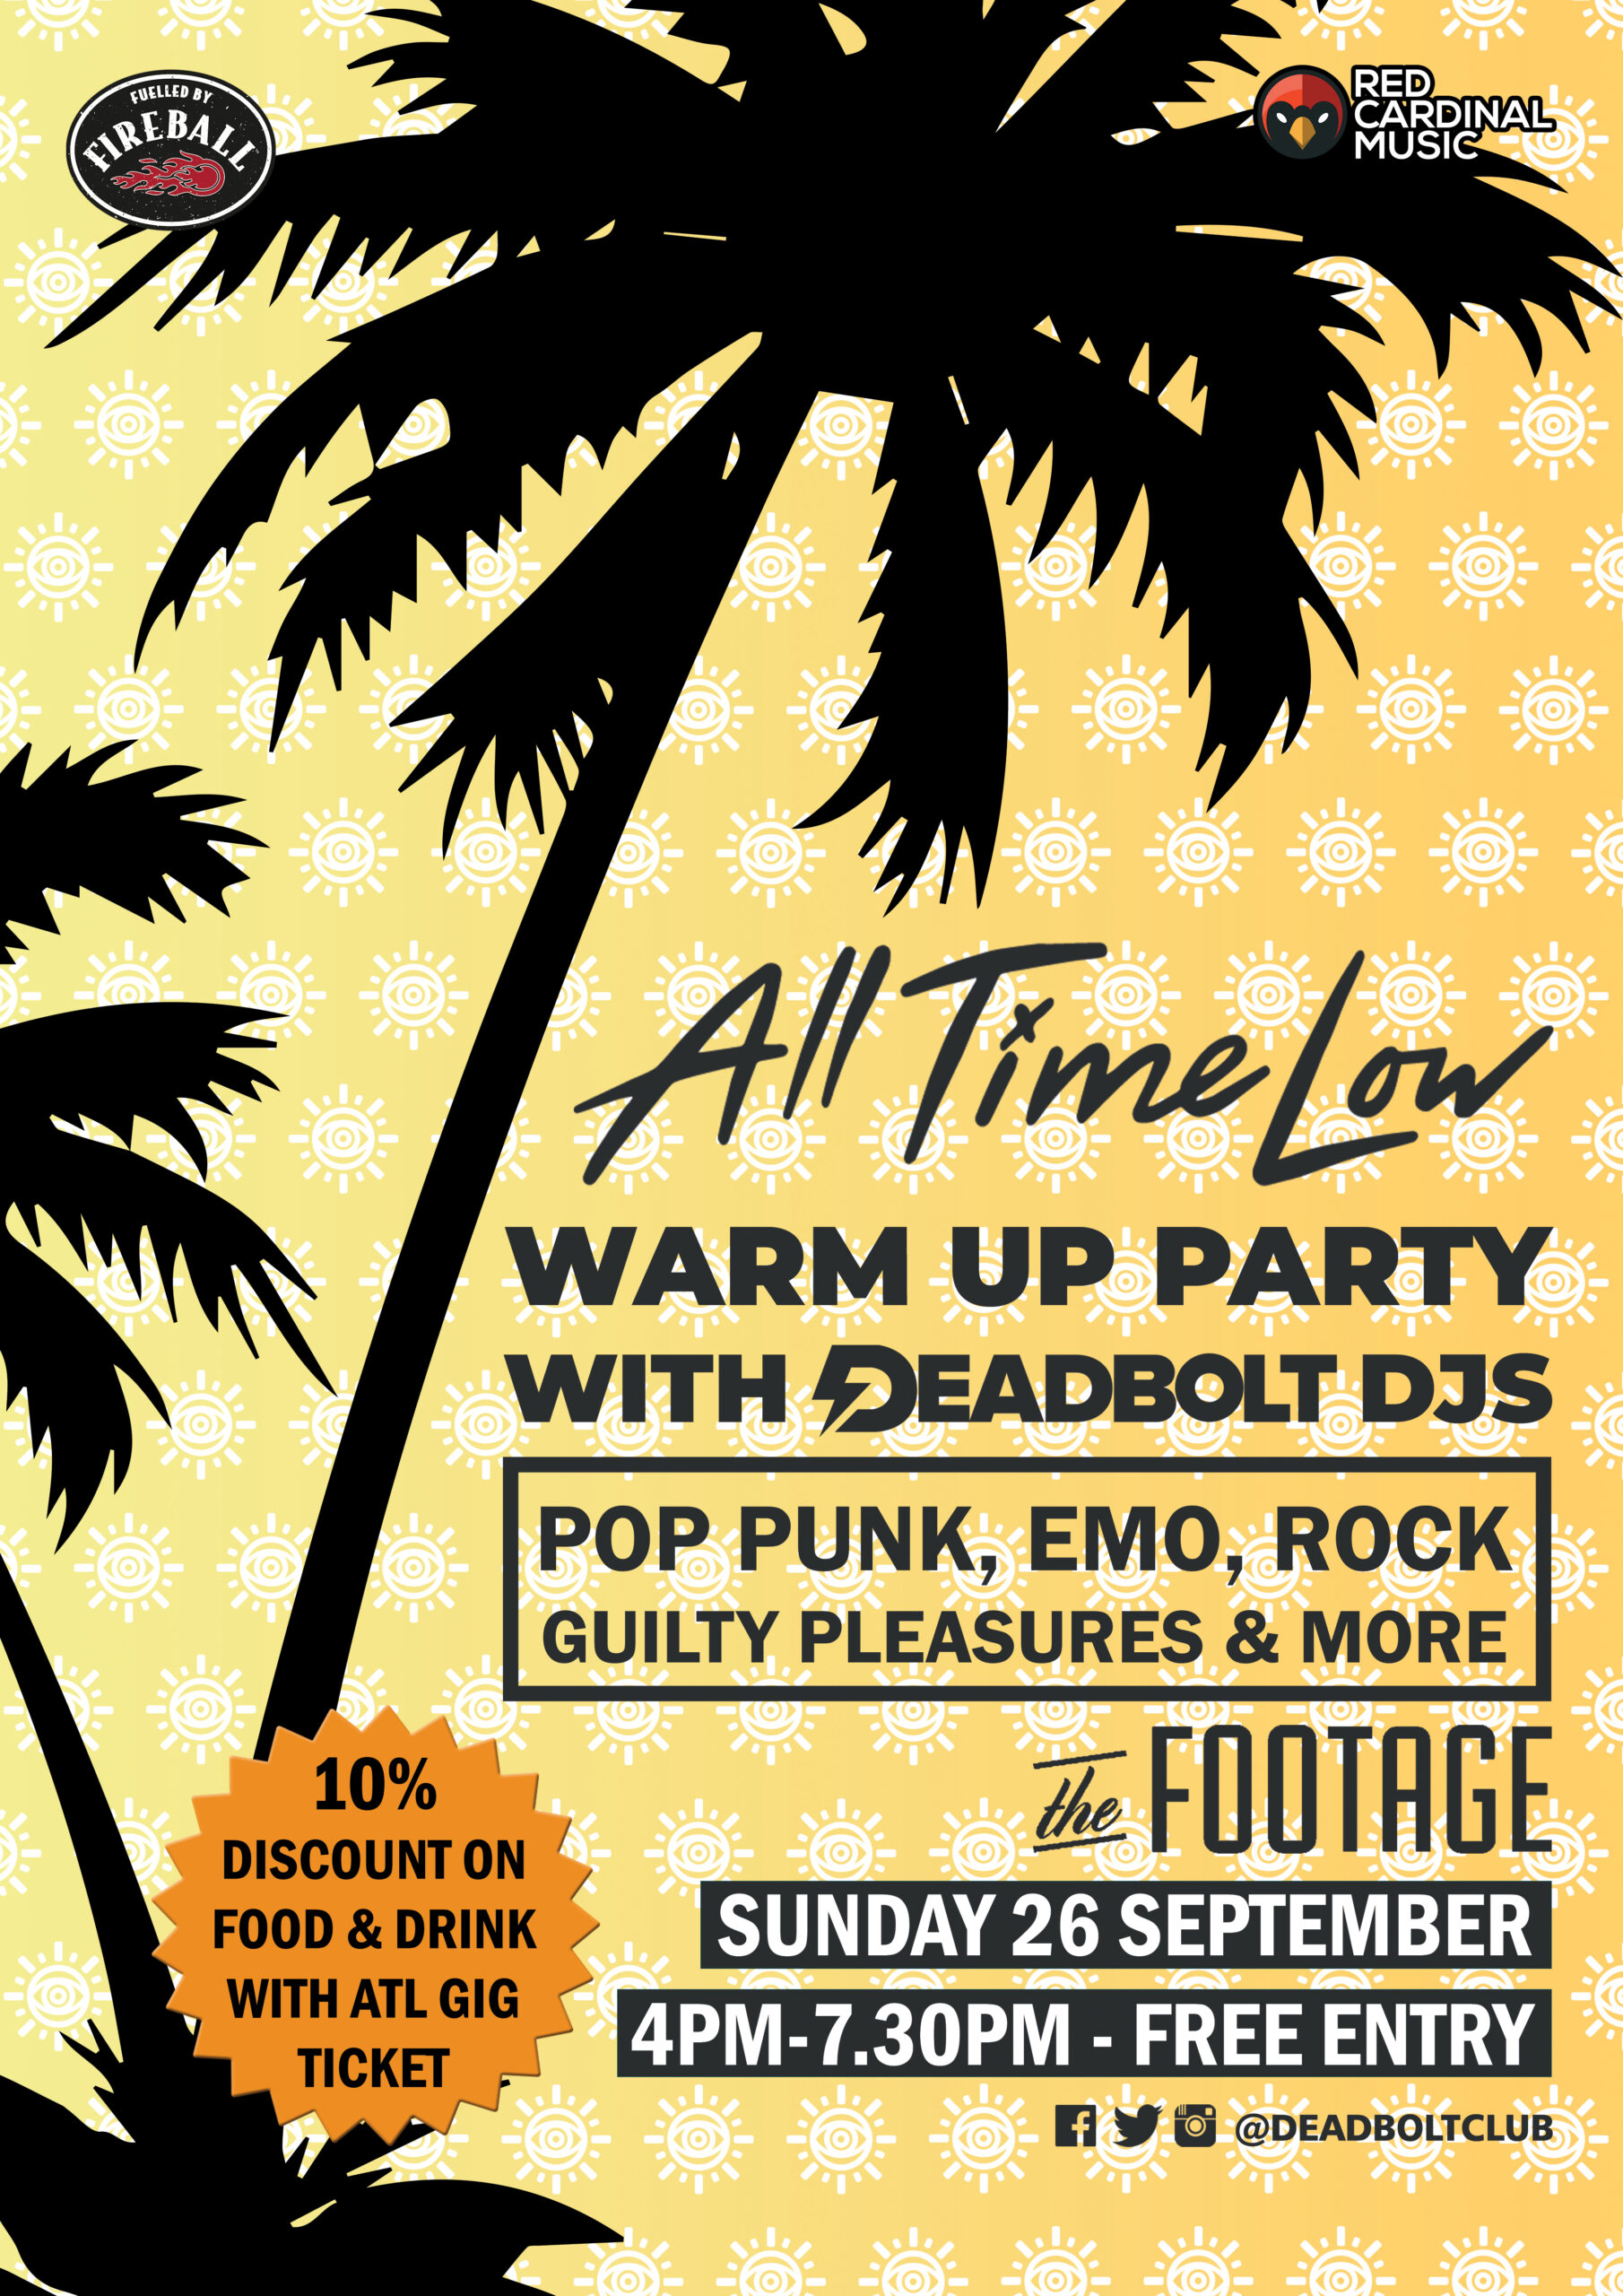 Deadbolt - All Time Low Preparty - The Footage - Sep 21 - Poster - RGB Web